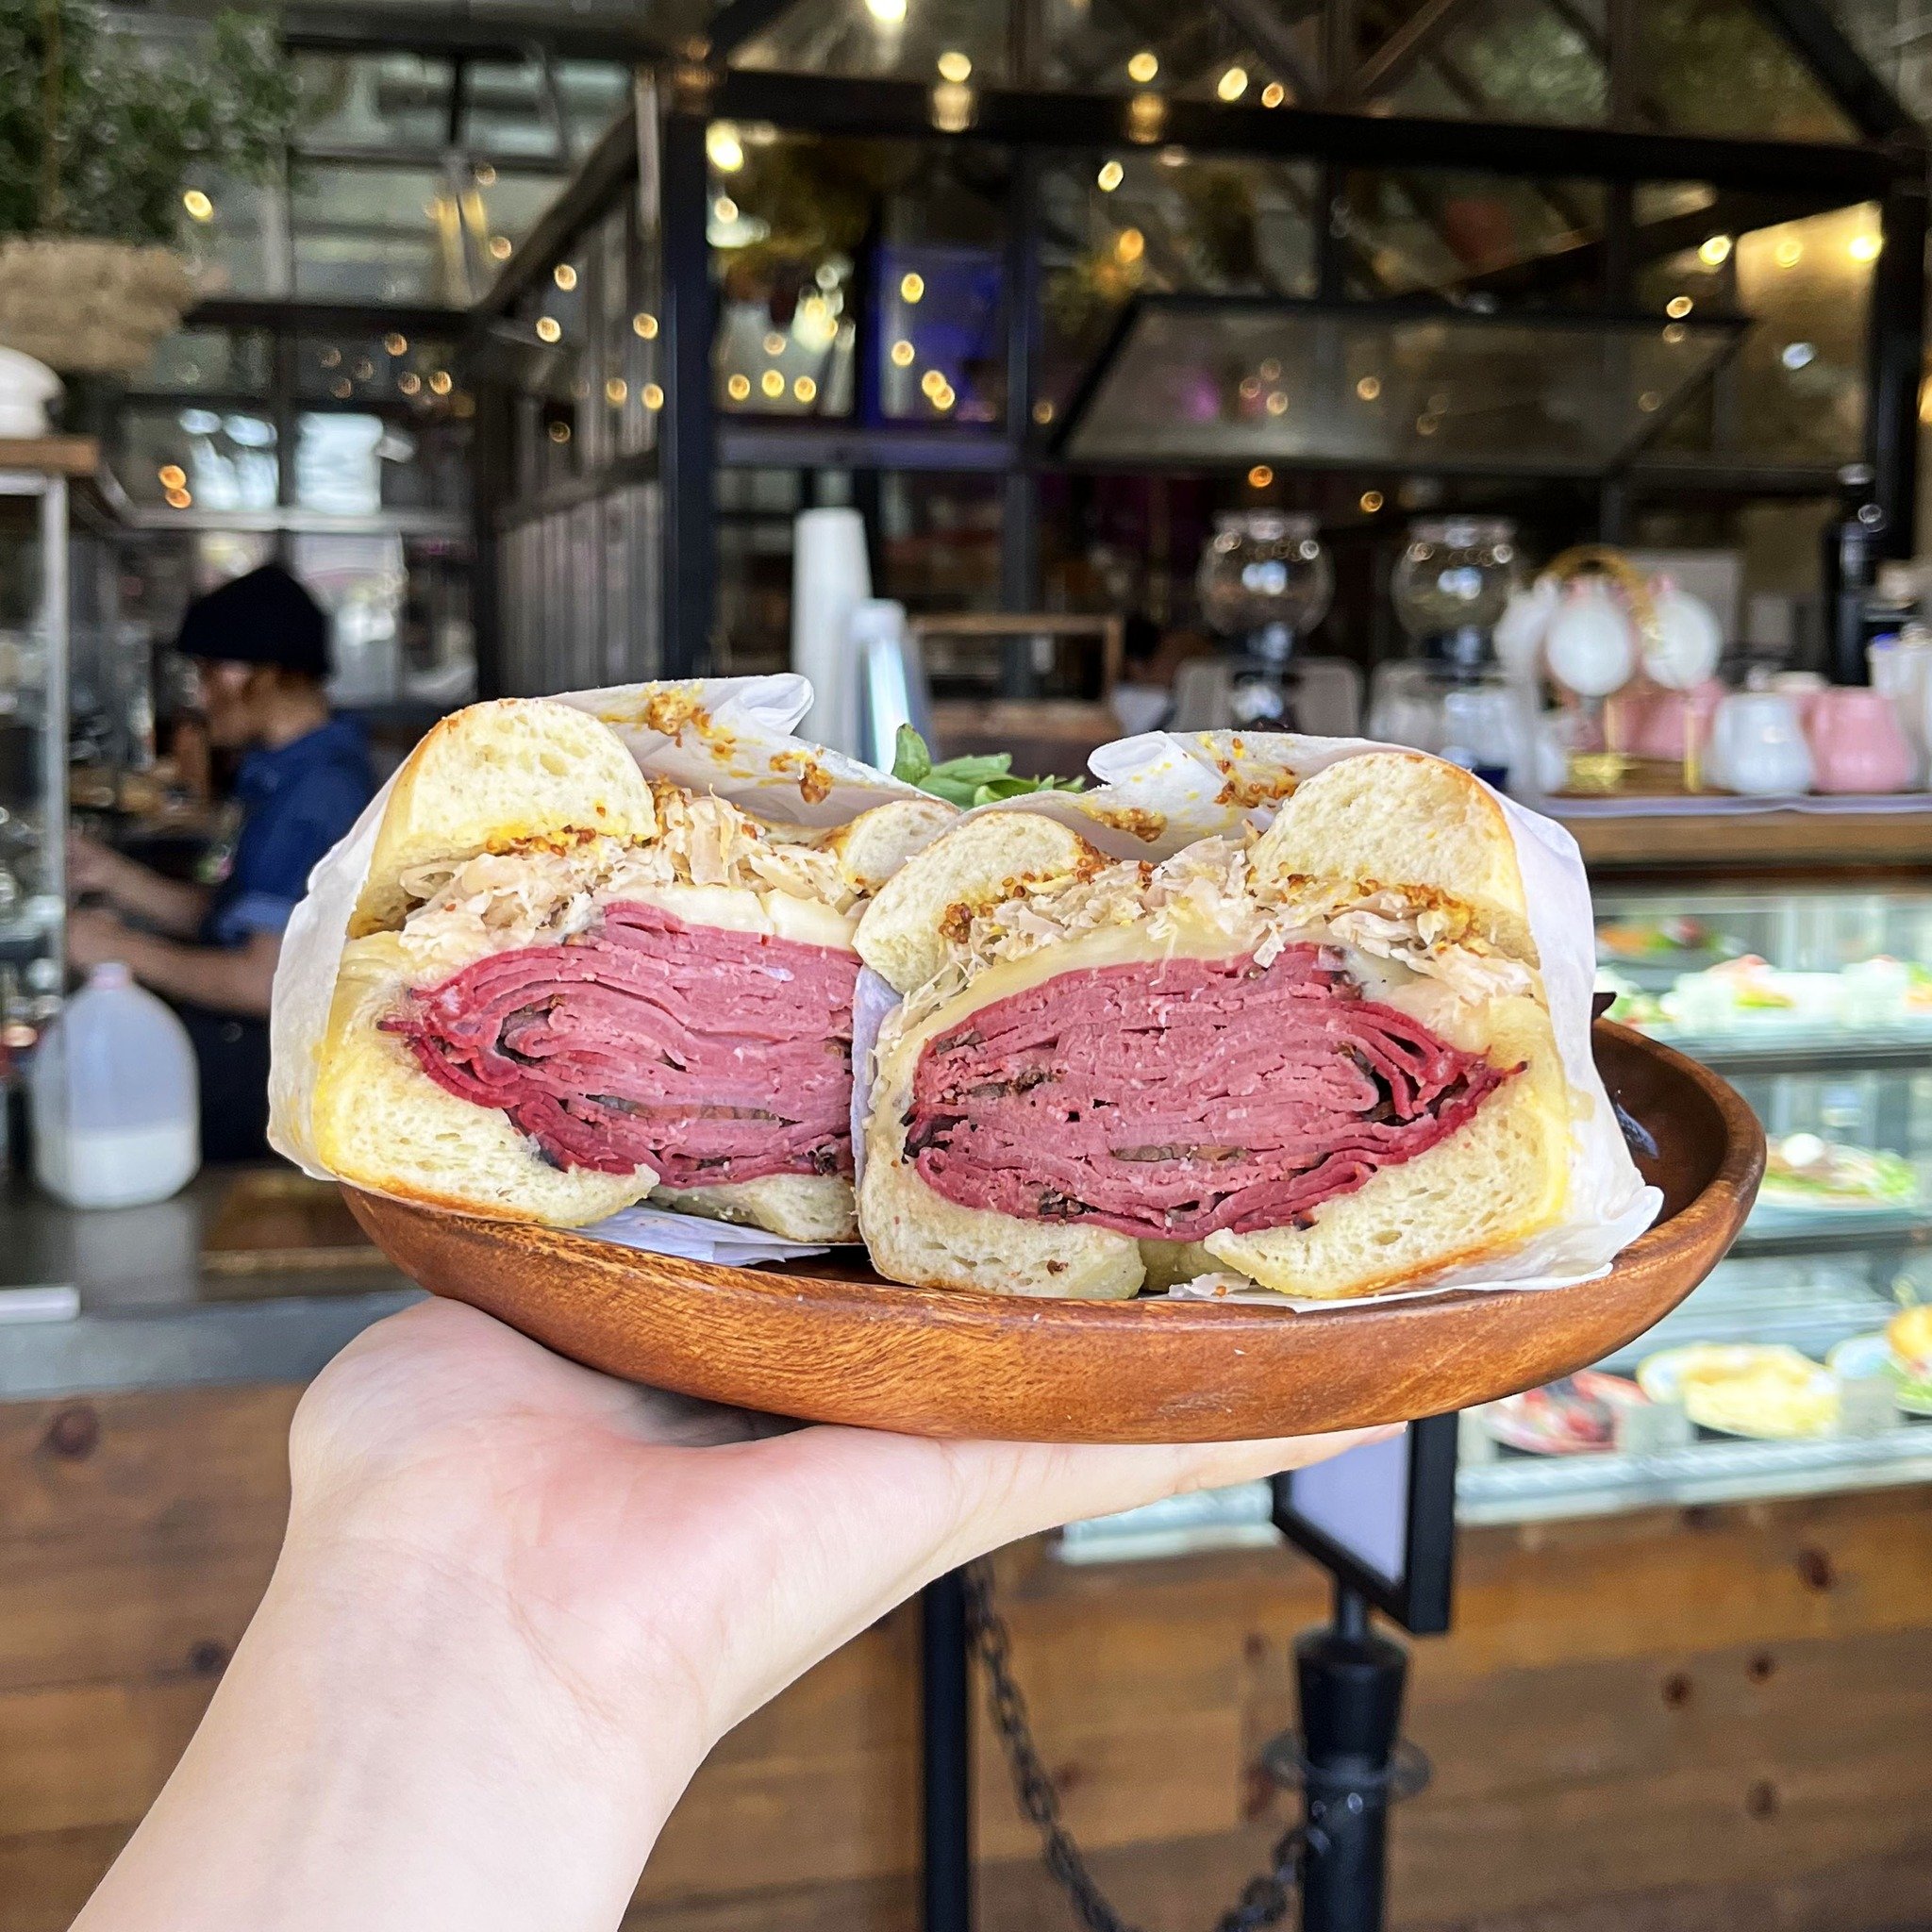 🥯🥪👋Say hello to our Reuben Bagel Sandwich!😘✨The perfect combination of savory pastrami and spicy horseradish that will tantalize your taste buds with every bite!😌❤️✨

👀✨Looking for a different flavor? We got you! A total of FIVE bagel sandwiche